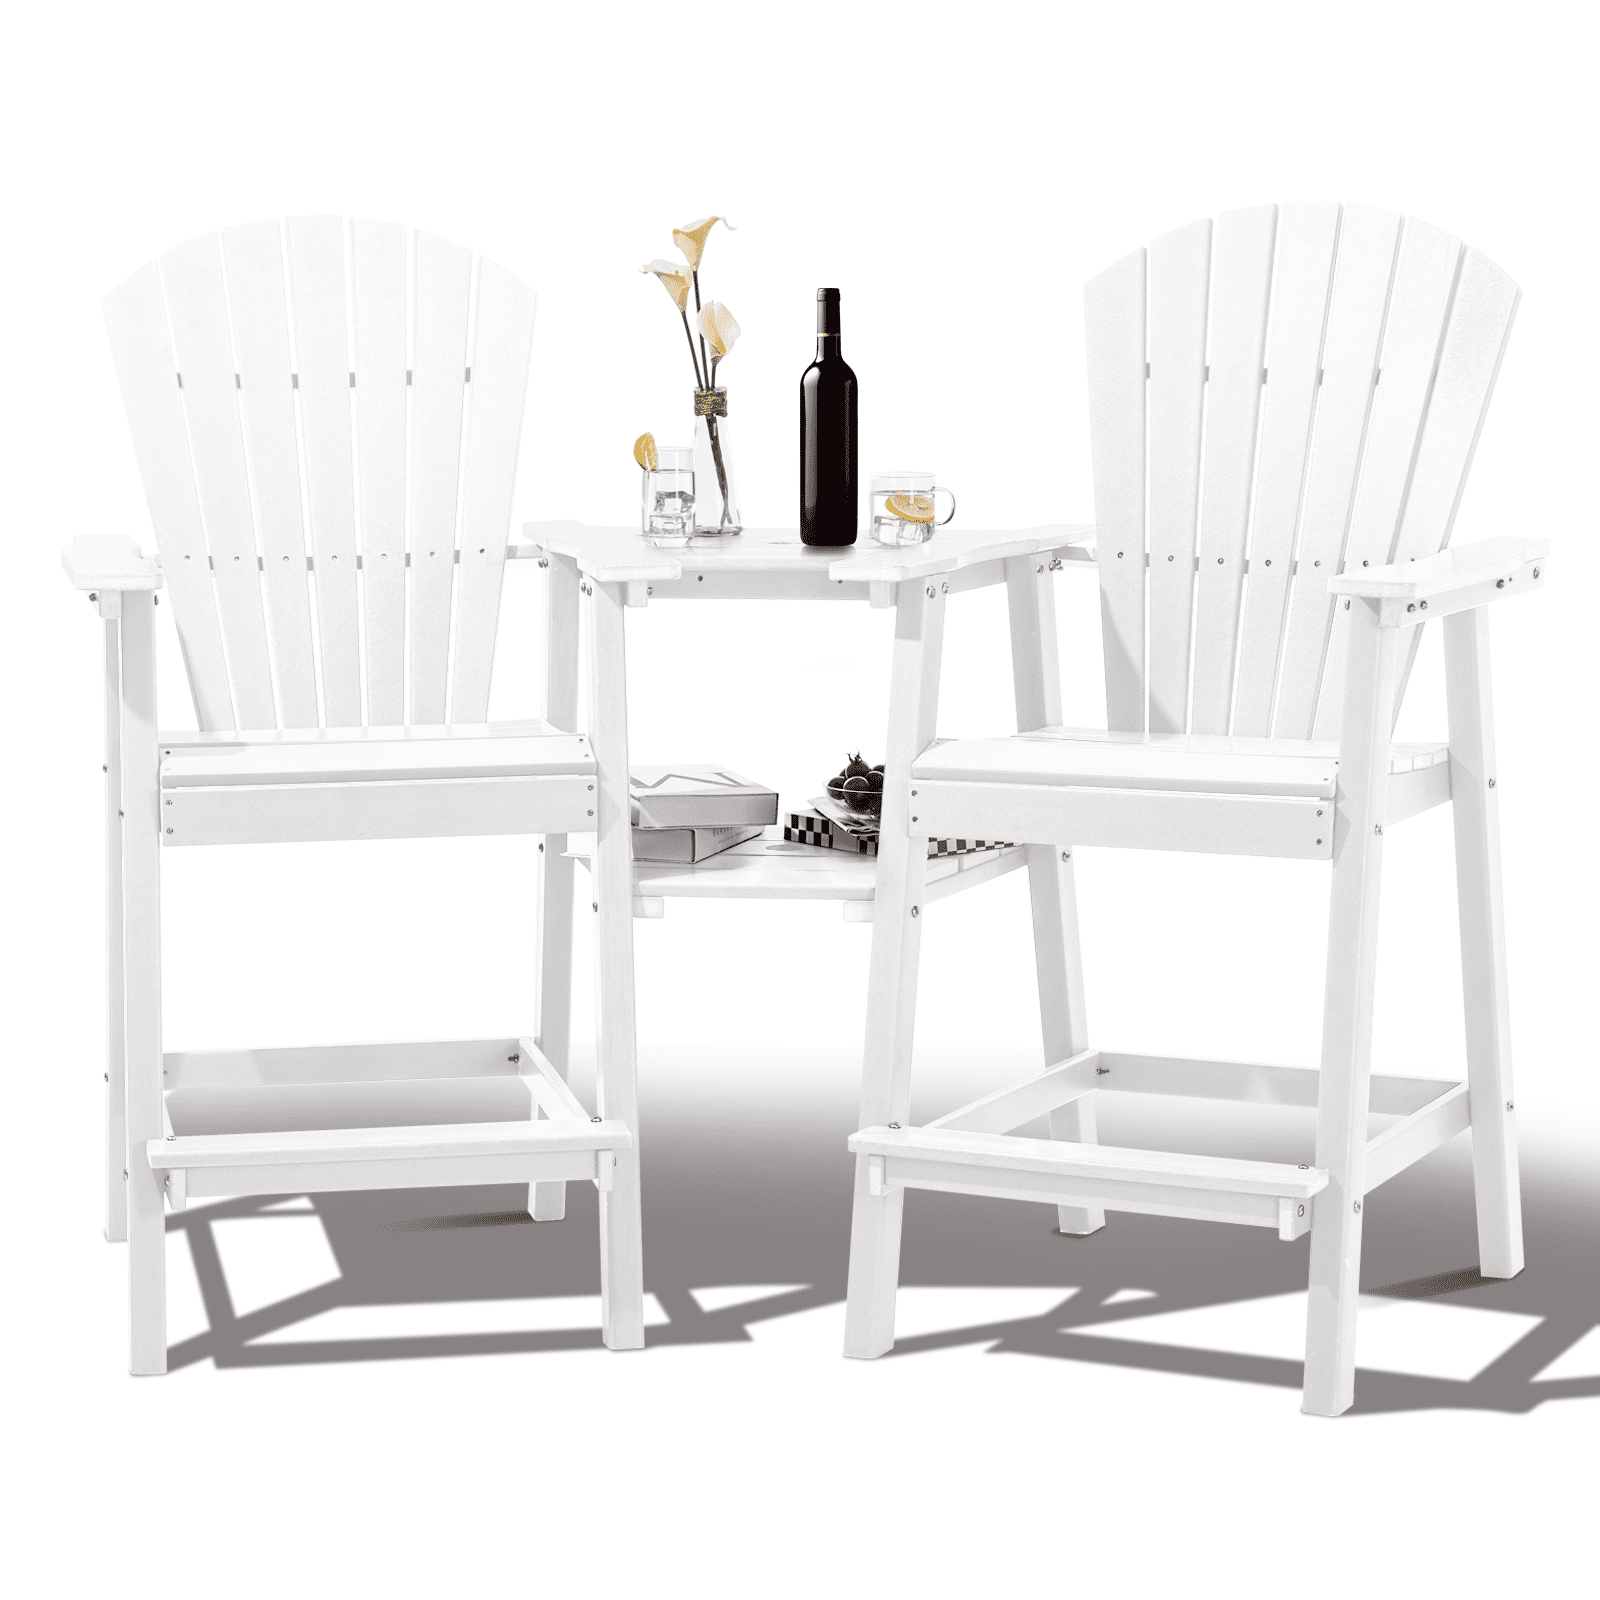 Tall Adirondack Chairs Set of 2, Outdoor Adirondack Barstools with Double Connecting Tray Patio Stools Weather Resistant for Outdoor Deck Lawn Pool Backyard, White - image 1 of 7